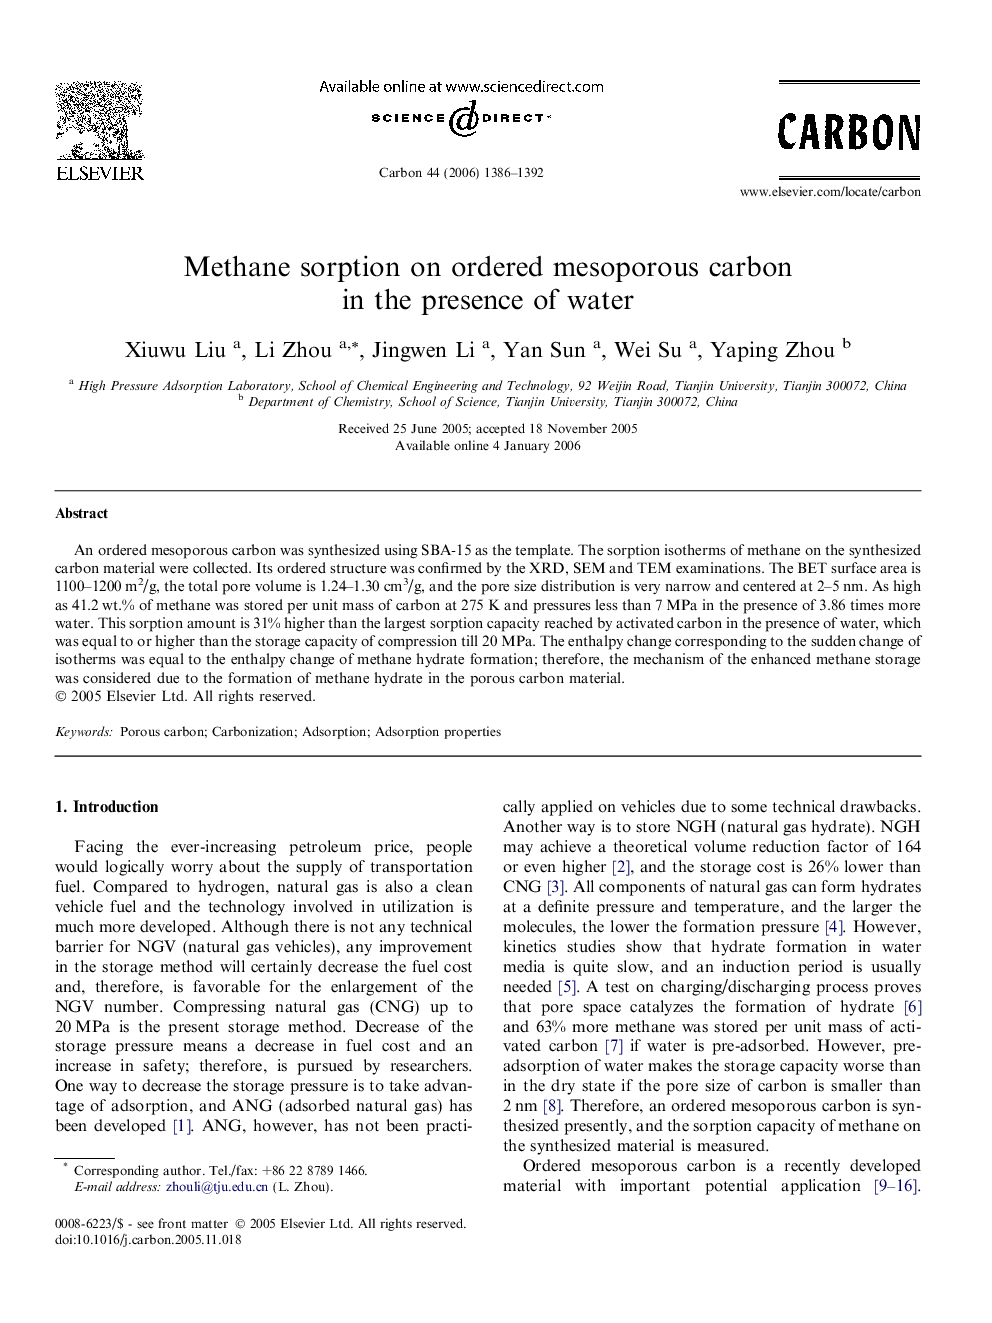 Methane sorption on ordered mesoporous carbon in the presence of water